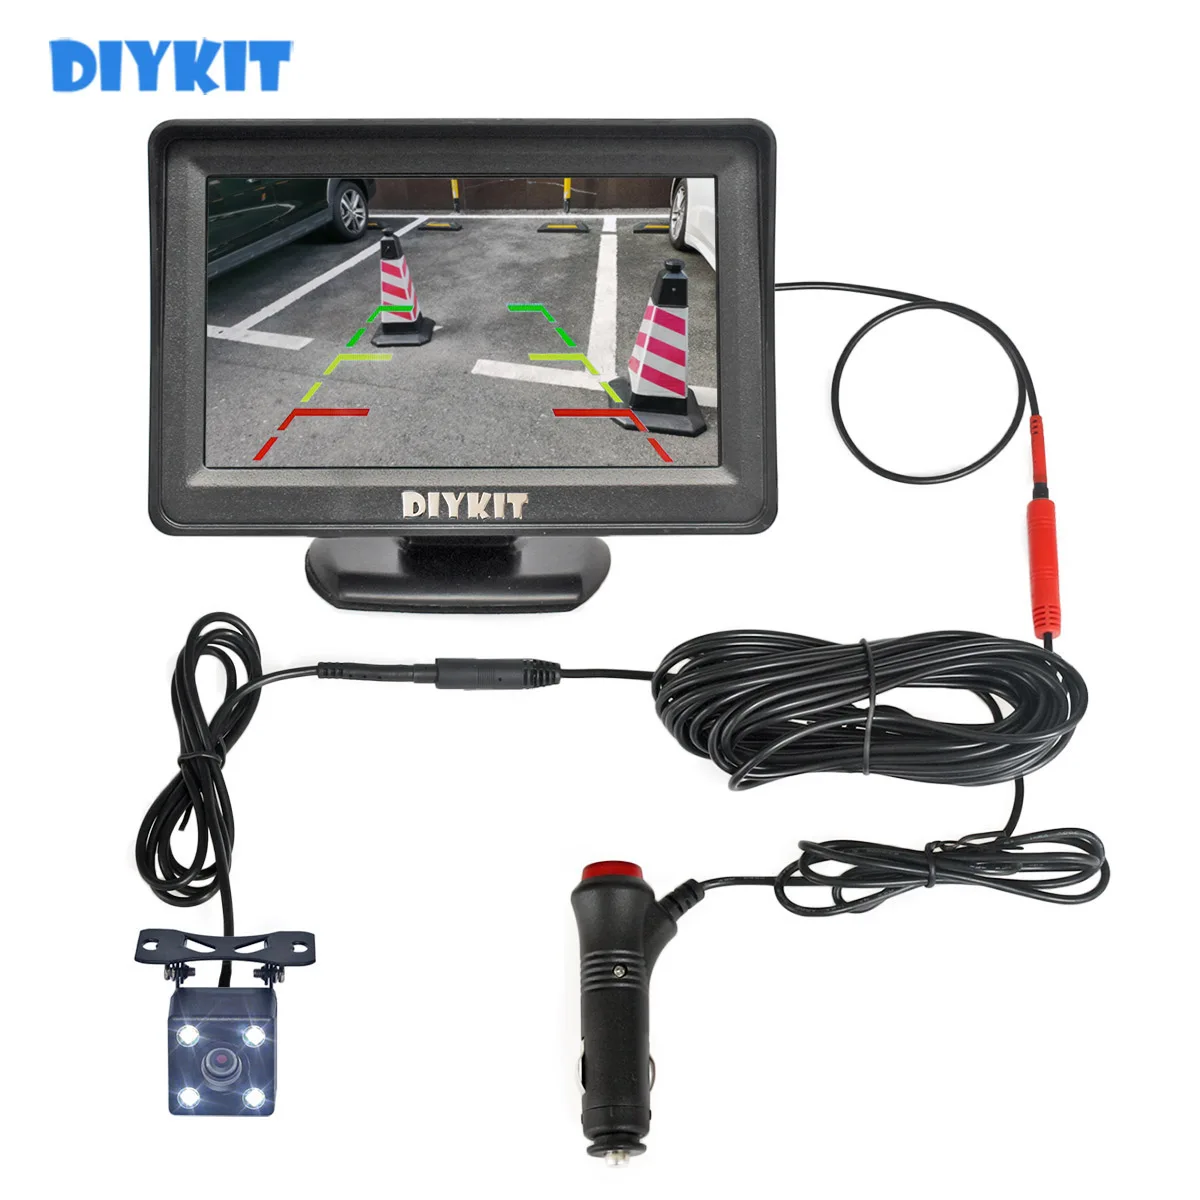 

DIYKIT 4.3inch Car Monitor Vehicle Rear View Reverse Backup Car LED Camera Video Parking System Car Charger Easy Installation